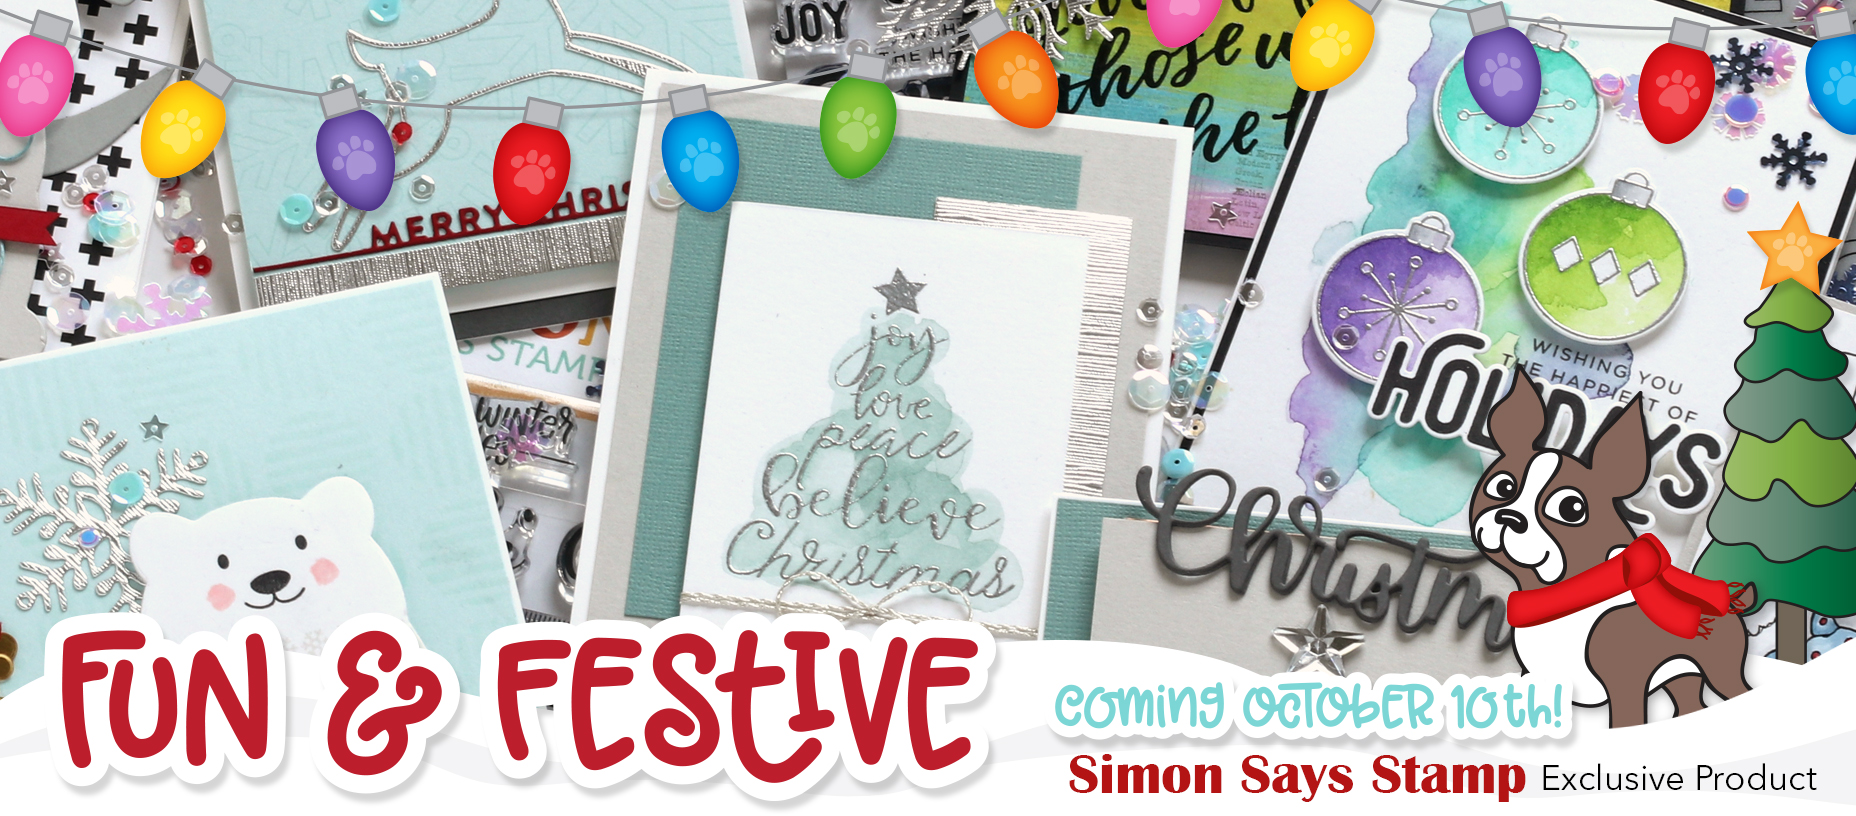 Simon Says Stamp Fun & Festive Exclusive Product Release